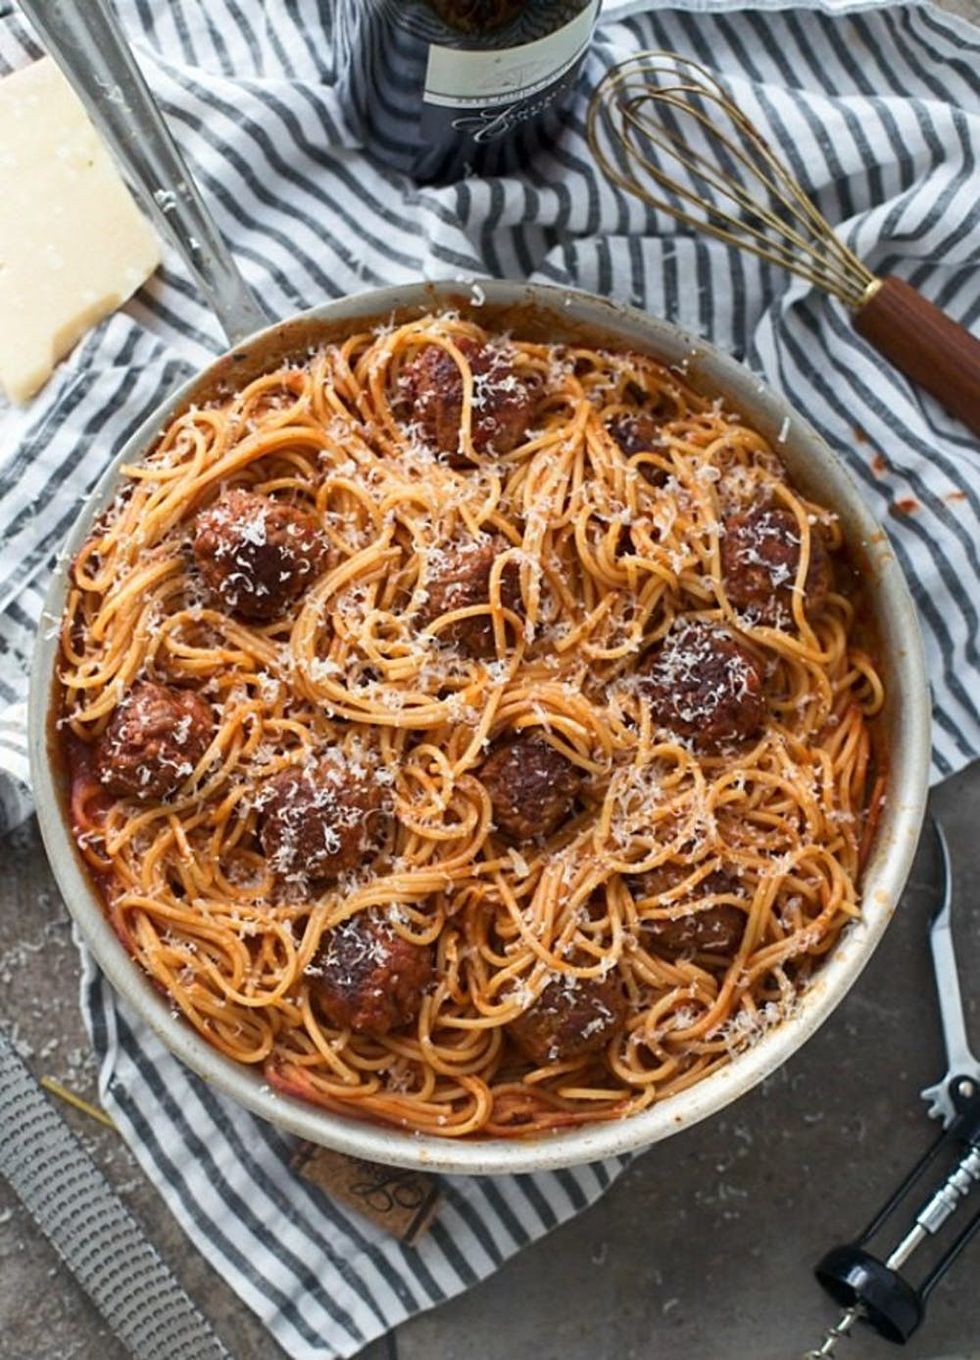 15 Romantically Simple Pasta Dinners That Scream “That's Amore!” - Brit + Co